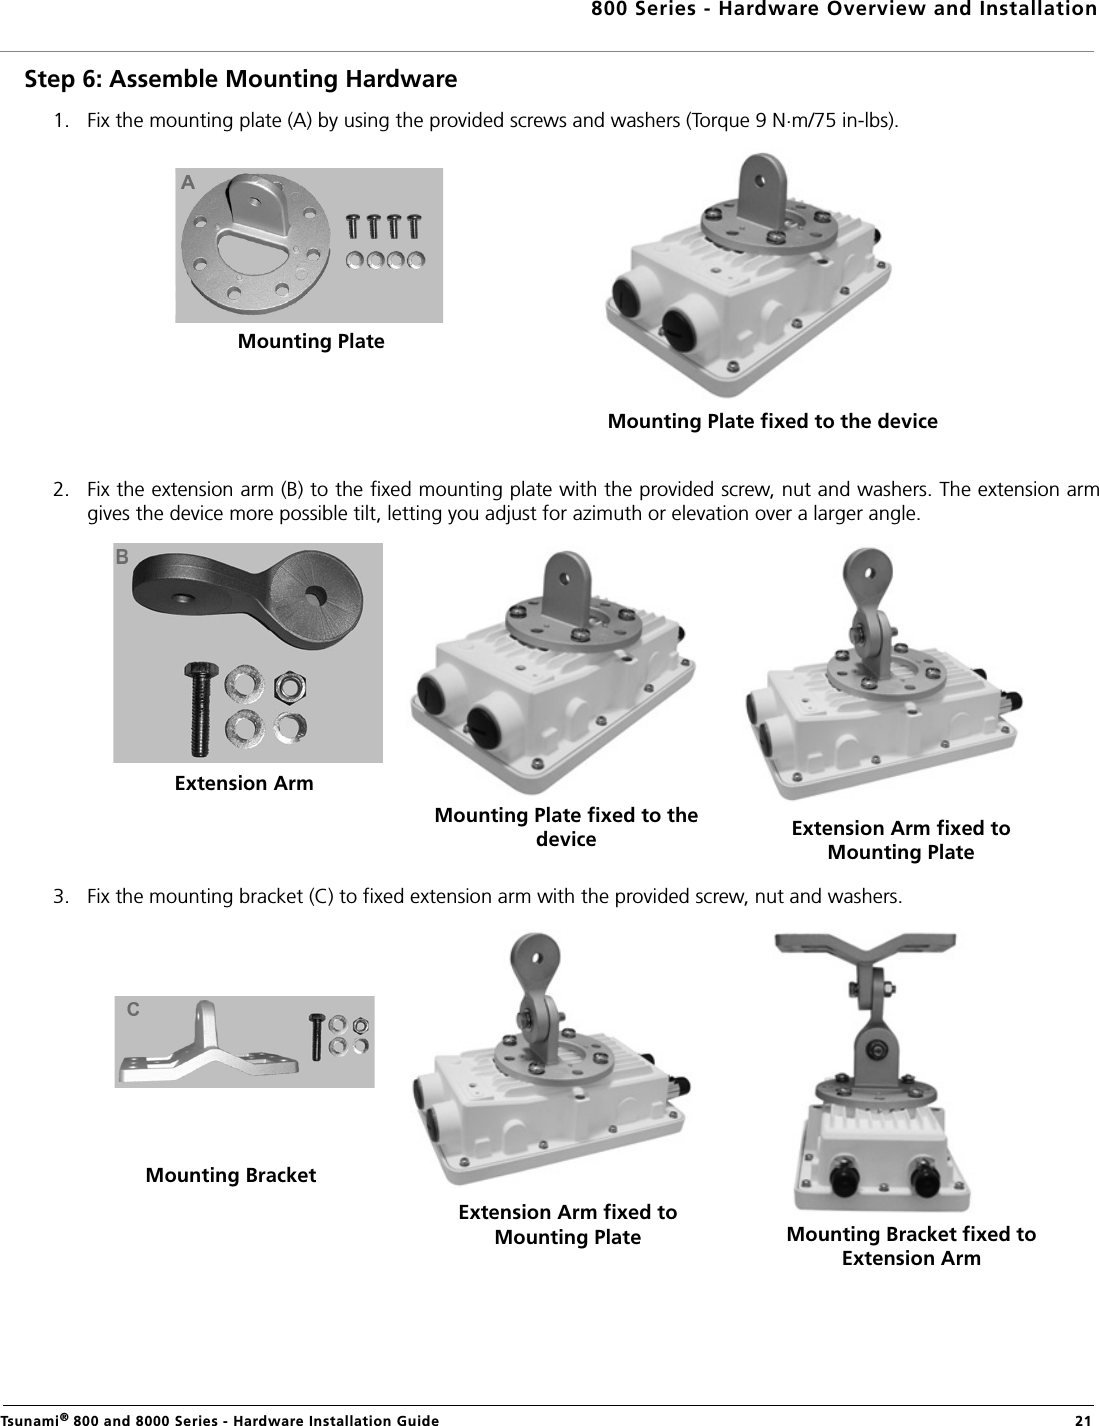 800 Series - Hardware Overview and InstallationTsunami® 800 and 8000 Series - Hardware Installation Guide  21Step 6: Assemble Mounting Hardware1. Fix the mounting plate (A) by using the provided screws and washers (Torque 9 N.m/75 in-lbs).2. Fix the extension arm (B) to the fixed mounting plate with the provided screw, nut and washers. The extension armgives the device more possible tilt, letting you adjust for azimuth or elevation over a larger angle.3. Fix the mounting bracket (C) to fixed extension arm with the provided screw, nut and washers.Mounting PlateMounting Plate fixed to the deviceExtension ArmMounting Plate fixed to the device Extension Arm fixed to Mounting PlateMounting BracketExtension Arm fixed to Mounting Plate Mounting Bracket fixed to Extension Arm